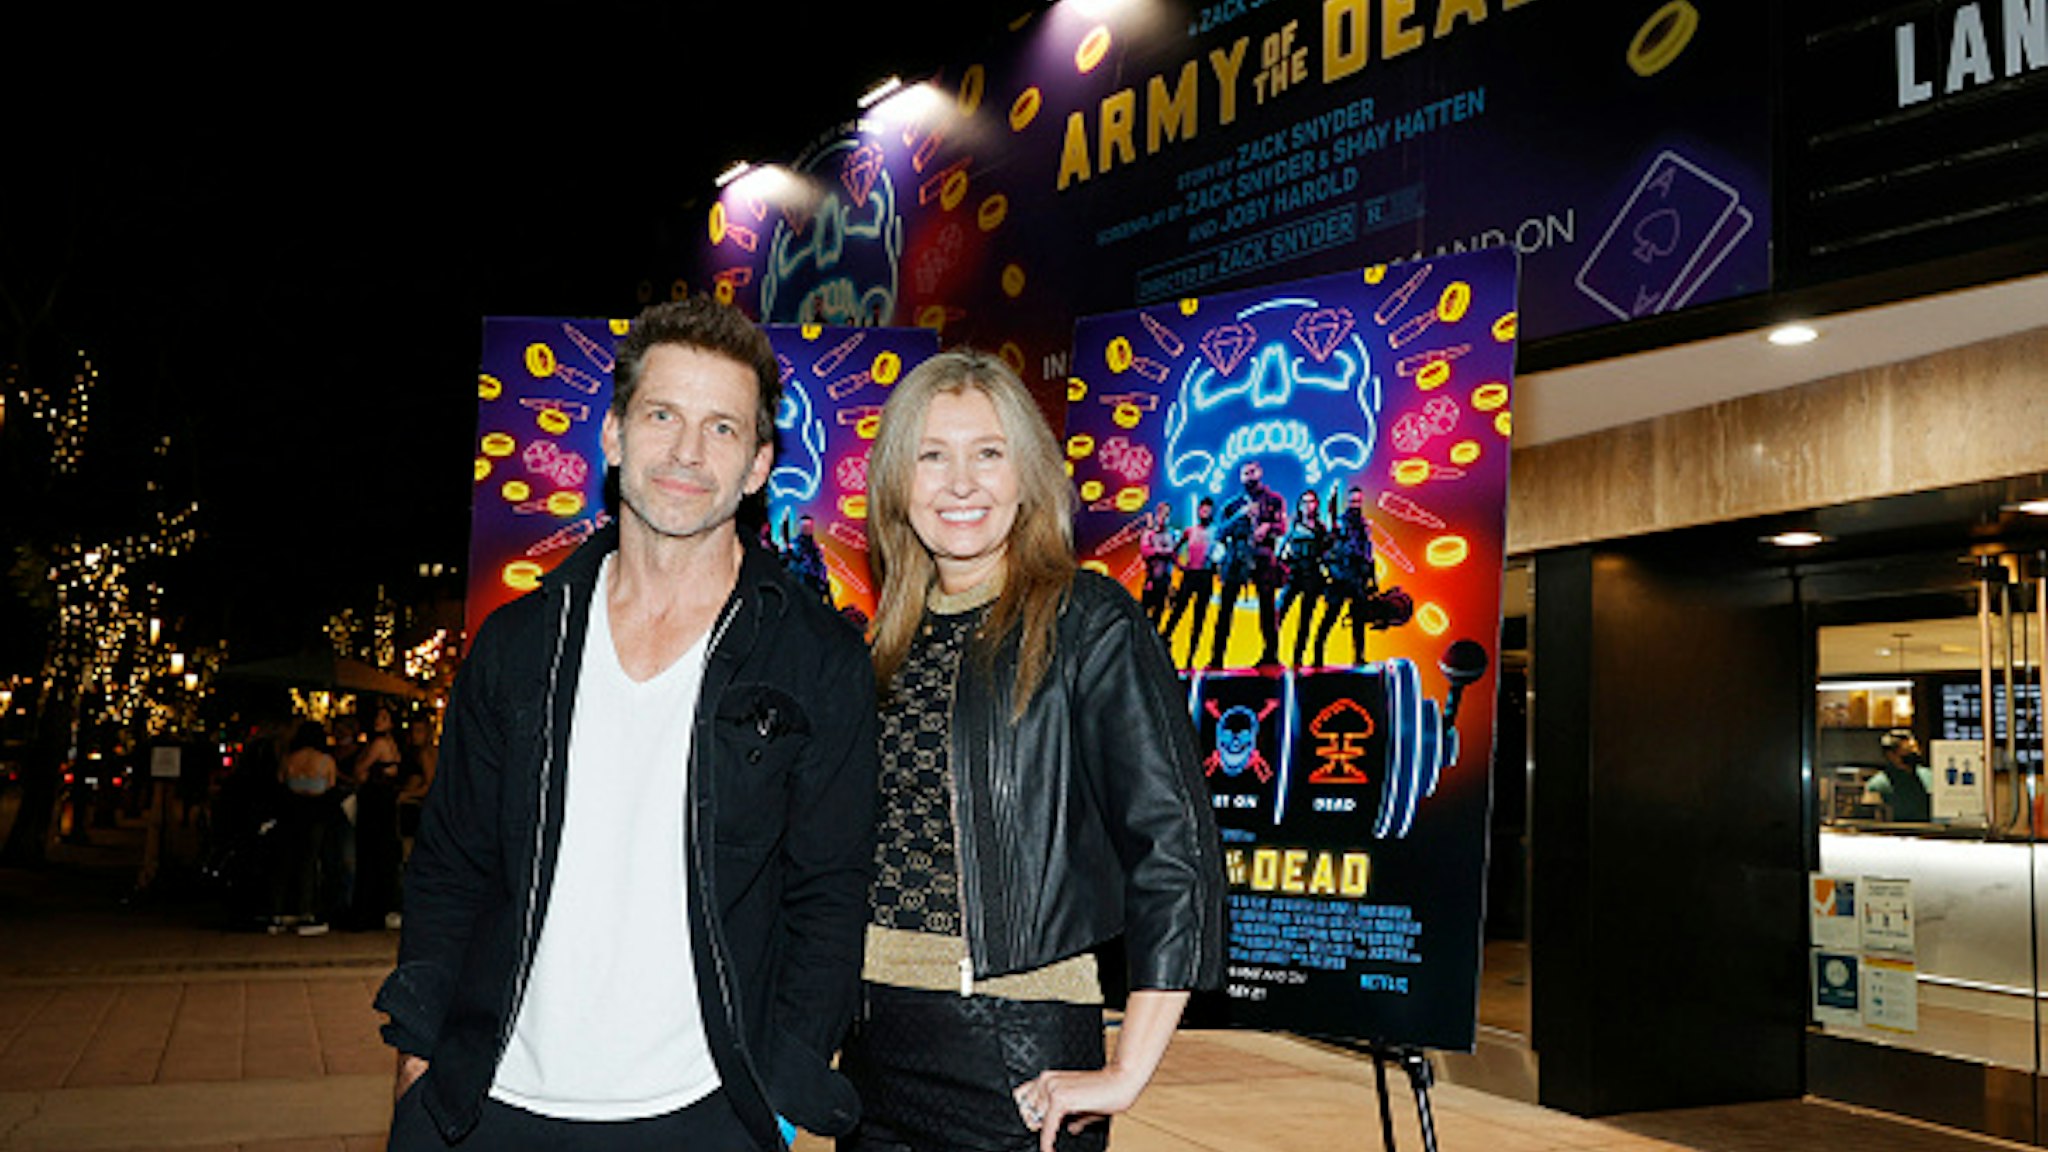 LOS ANGELES, CALIFORNIA - MAY 14: Director Zack Snyder (L) and producer Deborah Snyder (R) attend the grand reopening of the newly renovated Landmark Theatre Westwood with the premiere screening of Zack Snyder's "Army Of The Dead" at The Landmark Westwood on May 14, 2021 in Los Angeles, California.